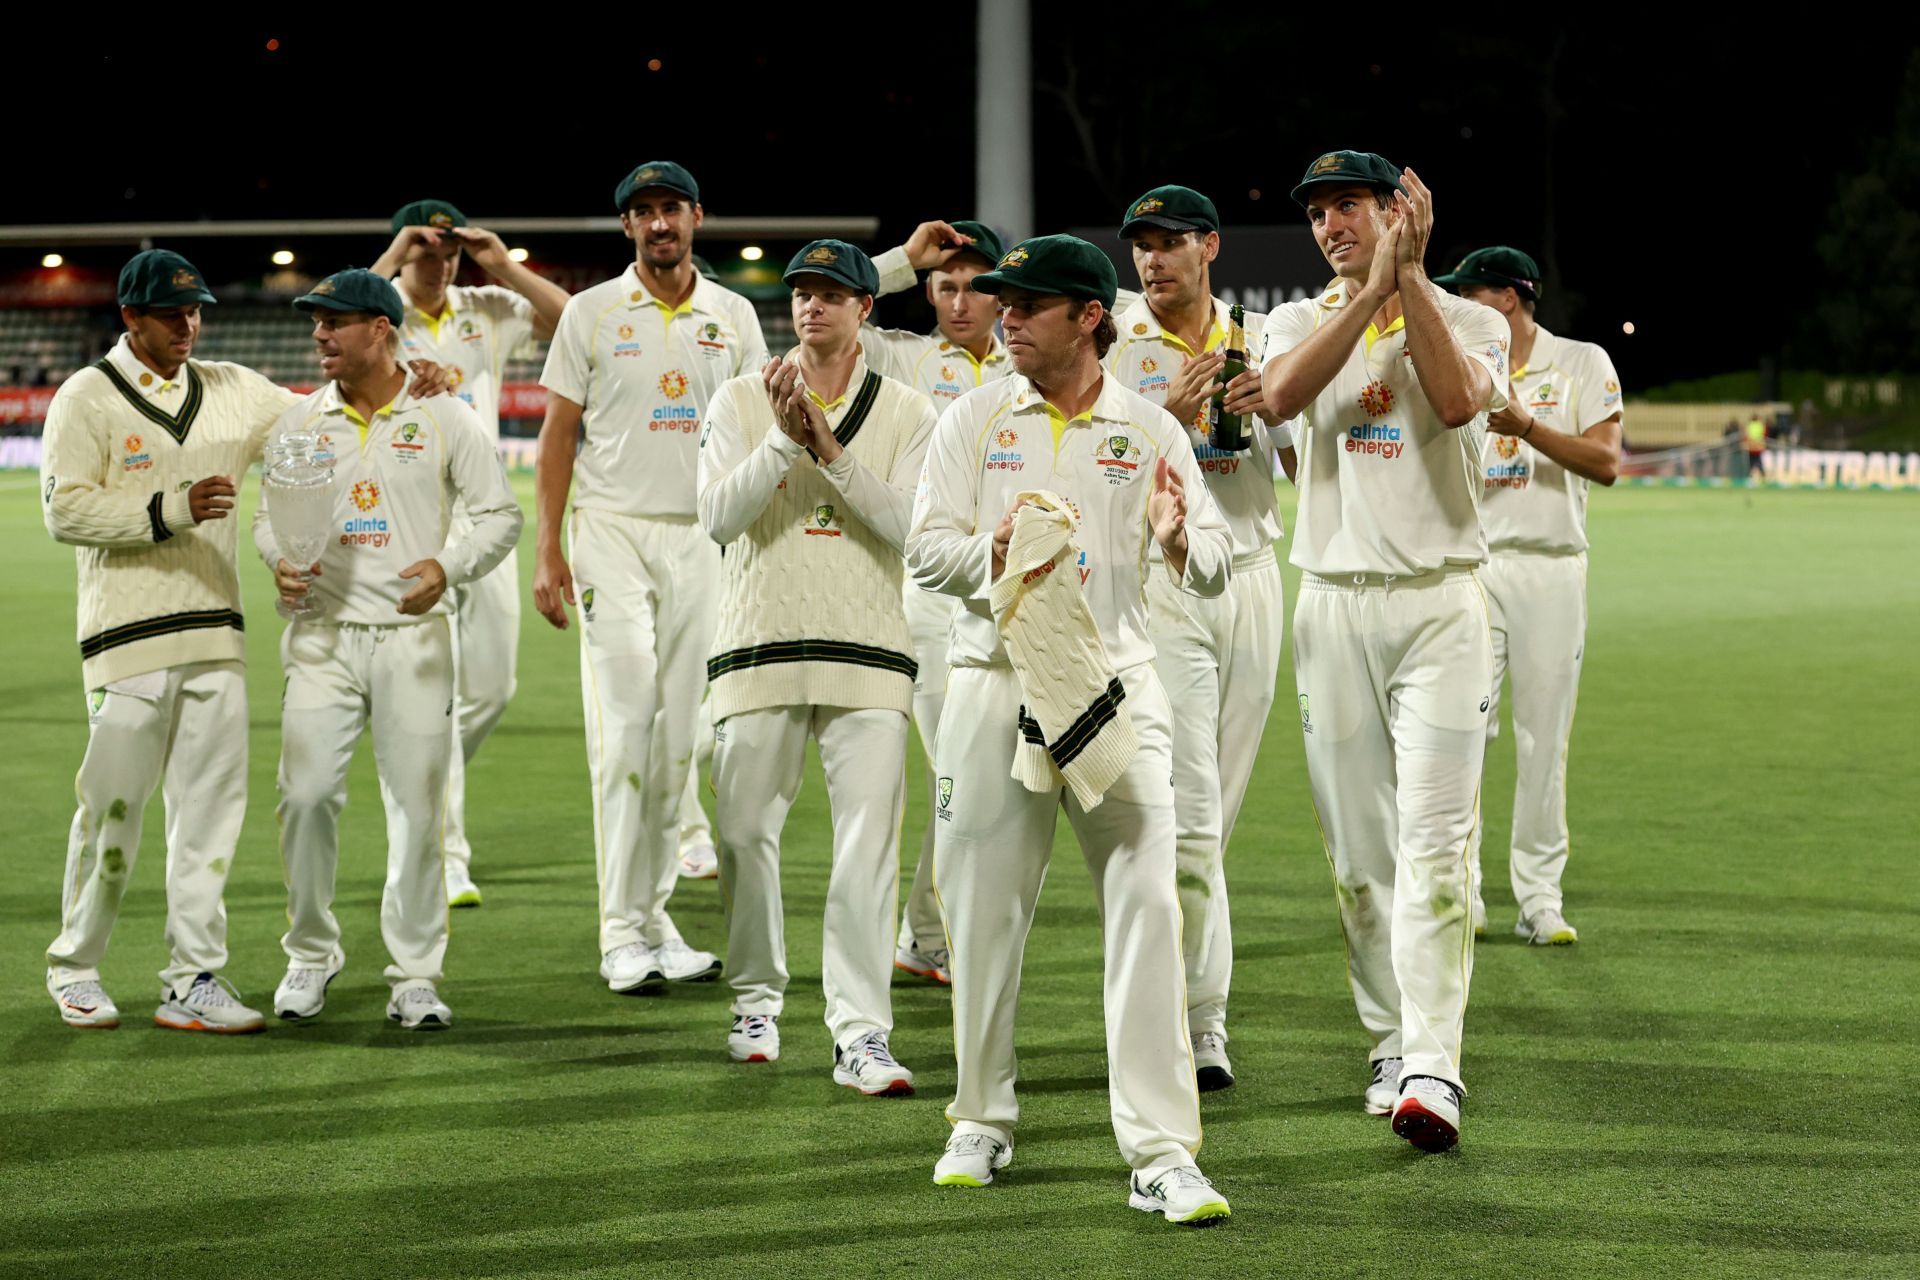 Enter caption Australia won the Ashes 2021/22 without being properly tested by England